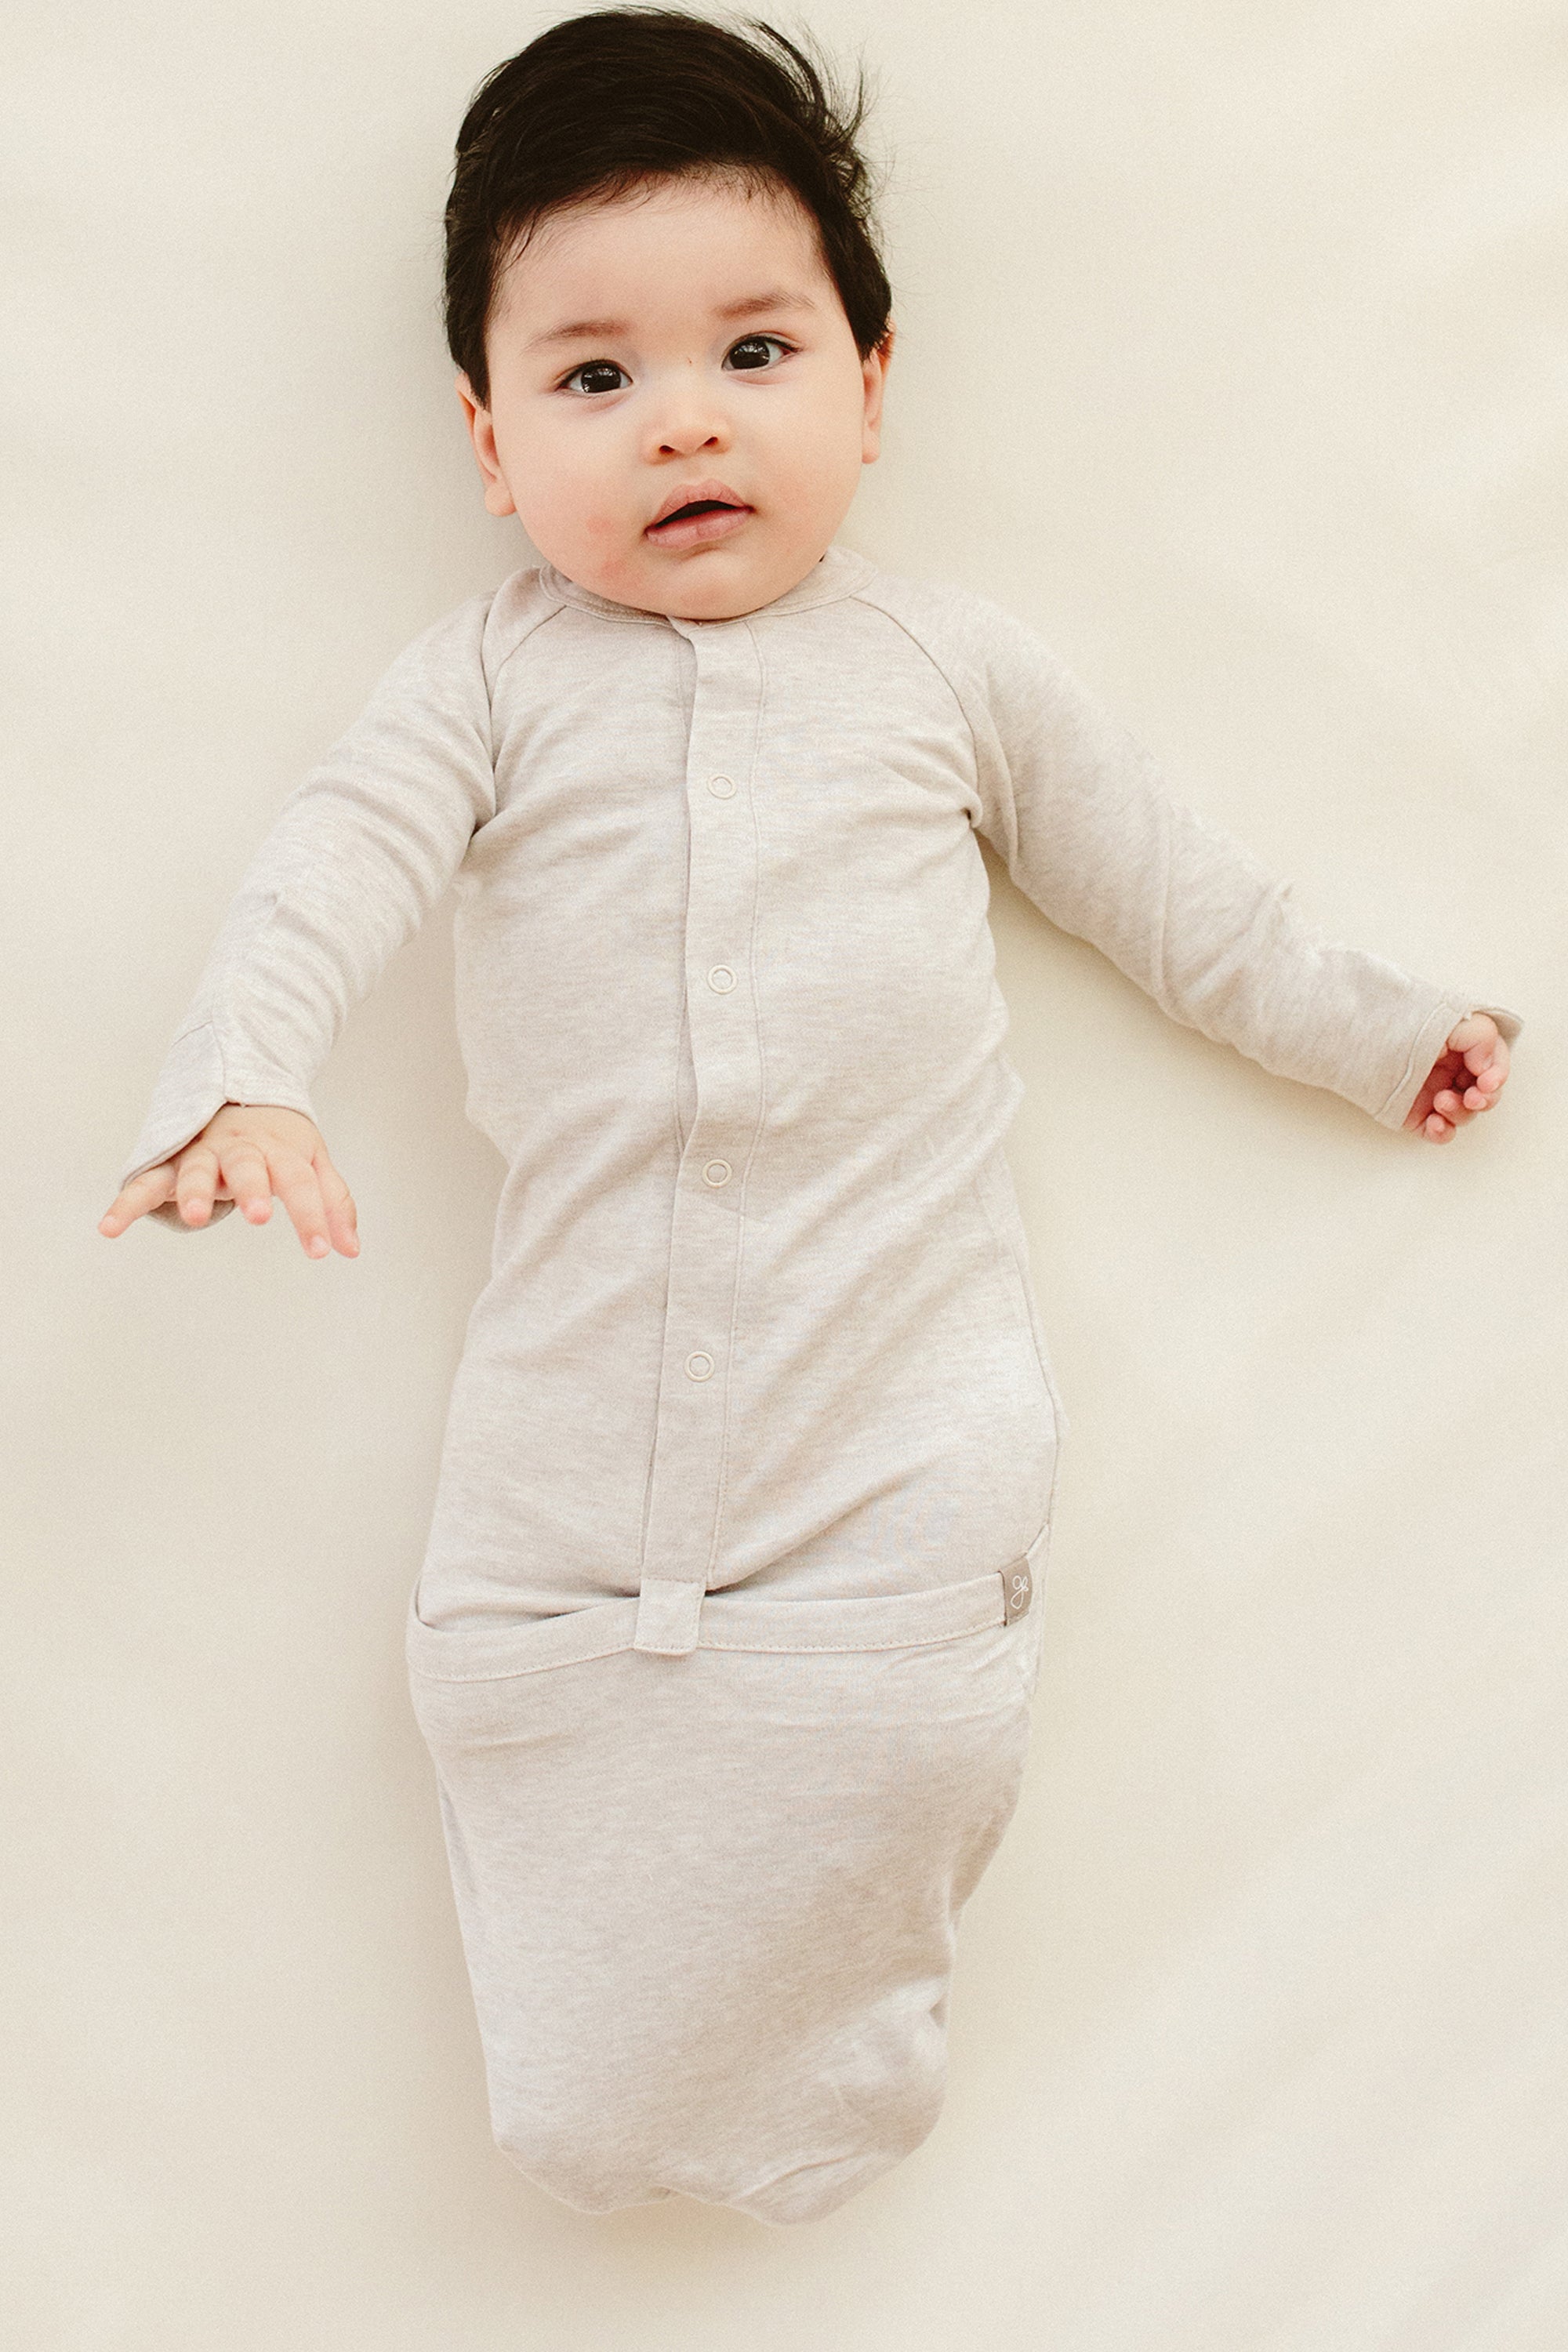 PREEMIE 24 HOUR CONVERTIBLE GOWN | STORM GRAY